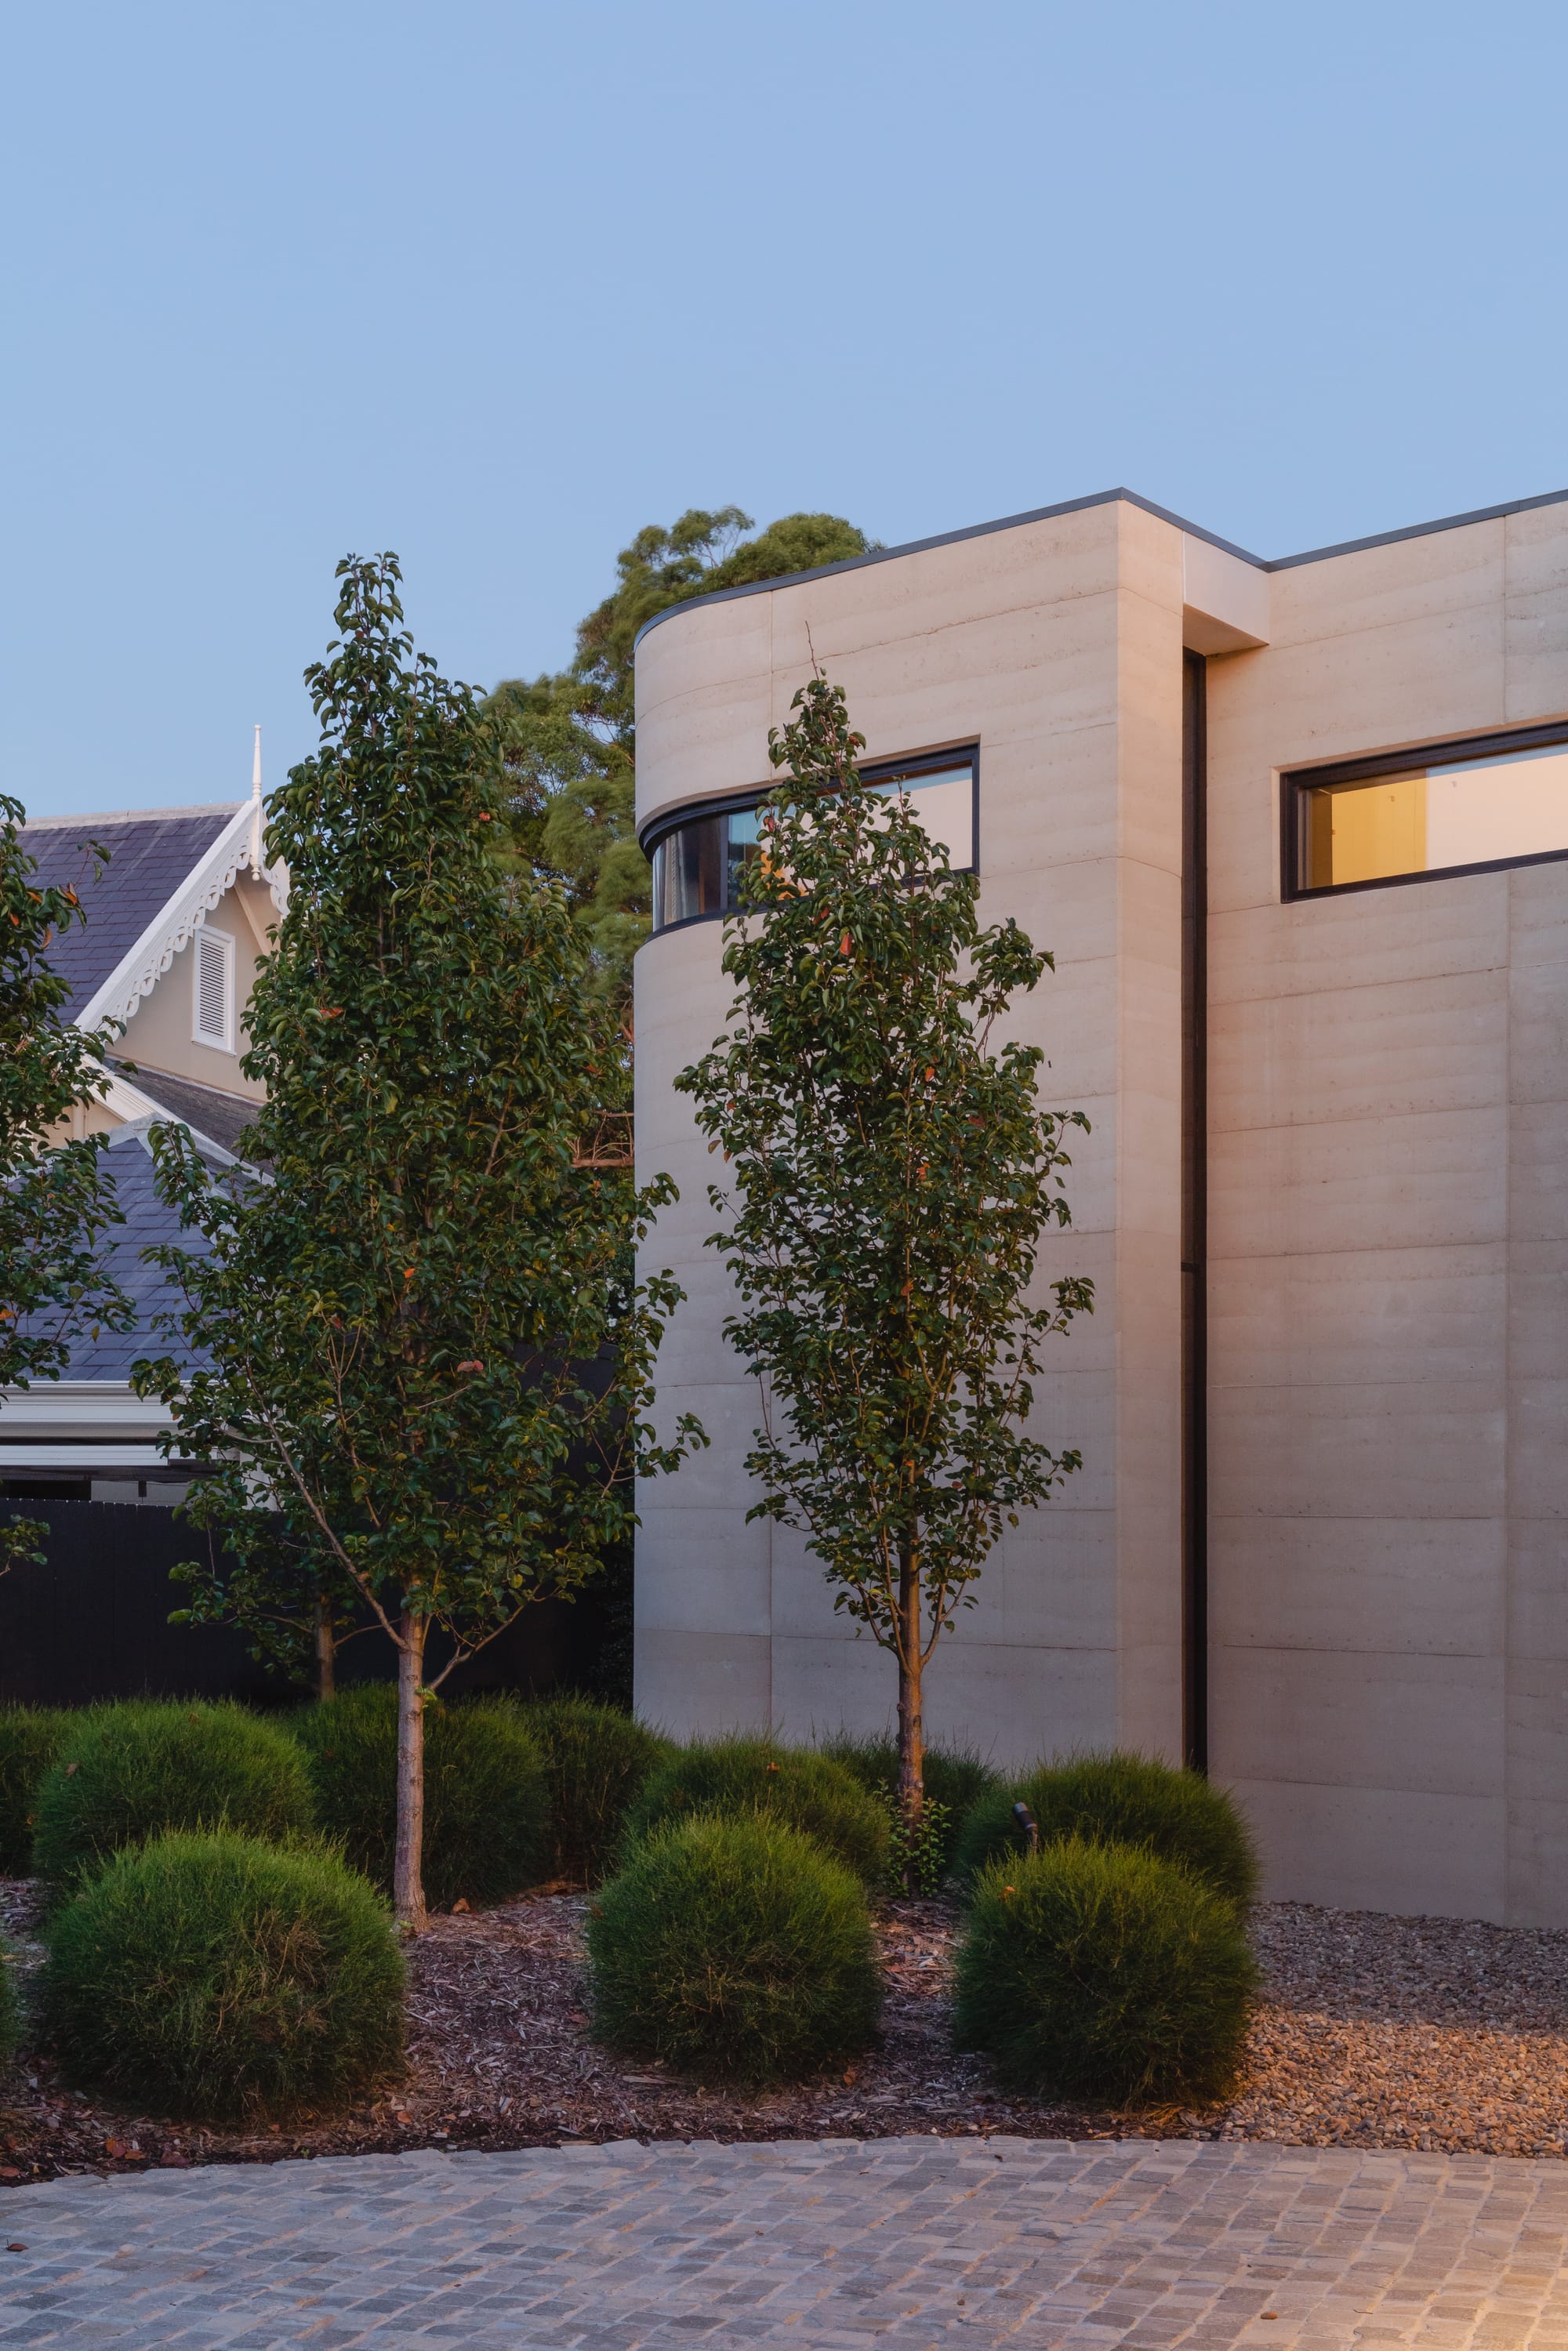 Kenneth Street by Design Studio Group showing the exterior rammed earth walls and landscape